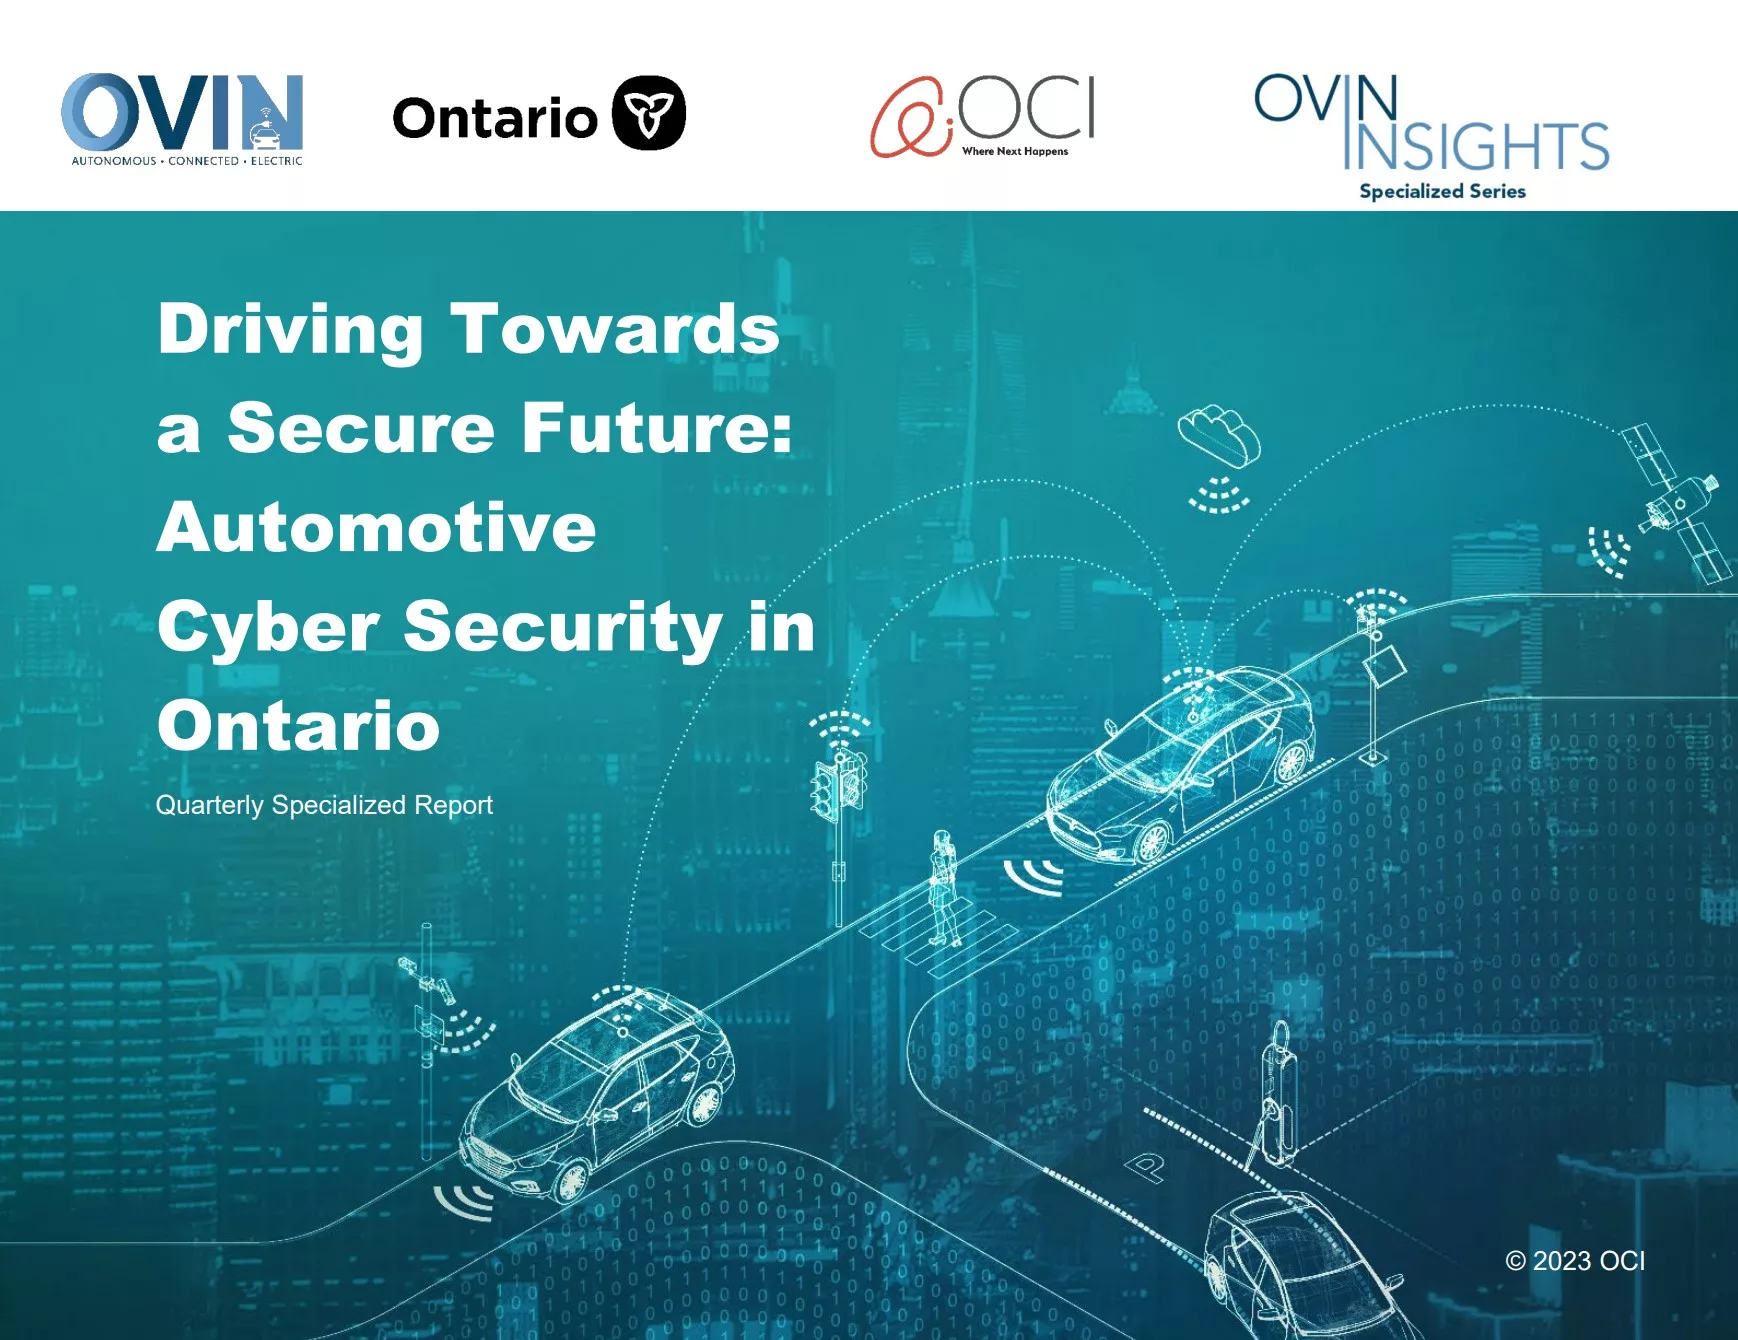 Driving Towards a Secure Future: Automotive Cyber Security in Ontario